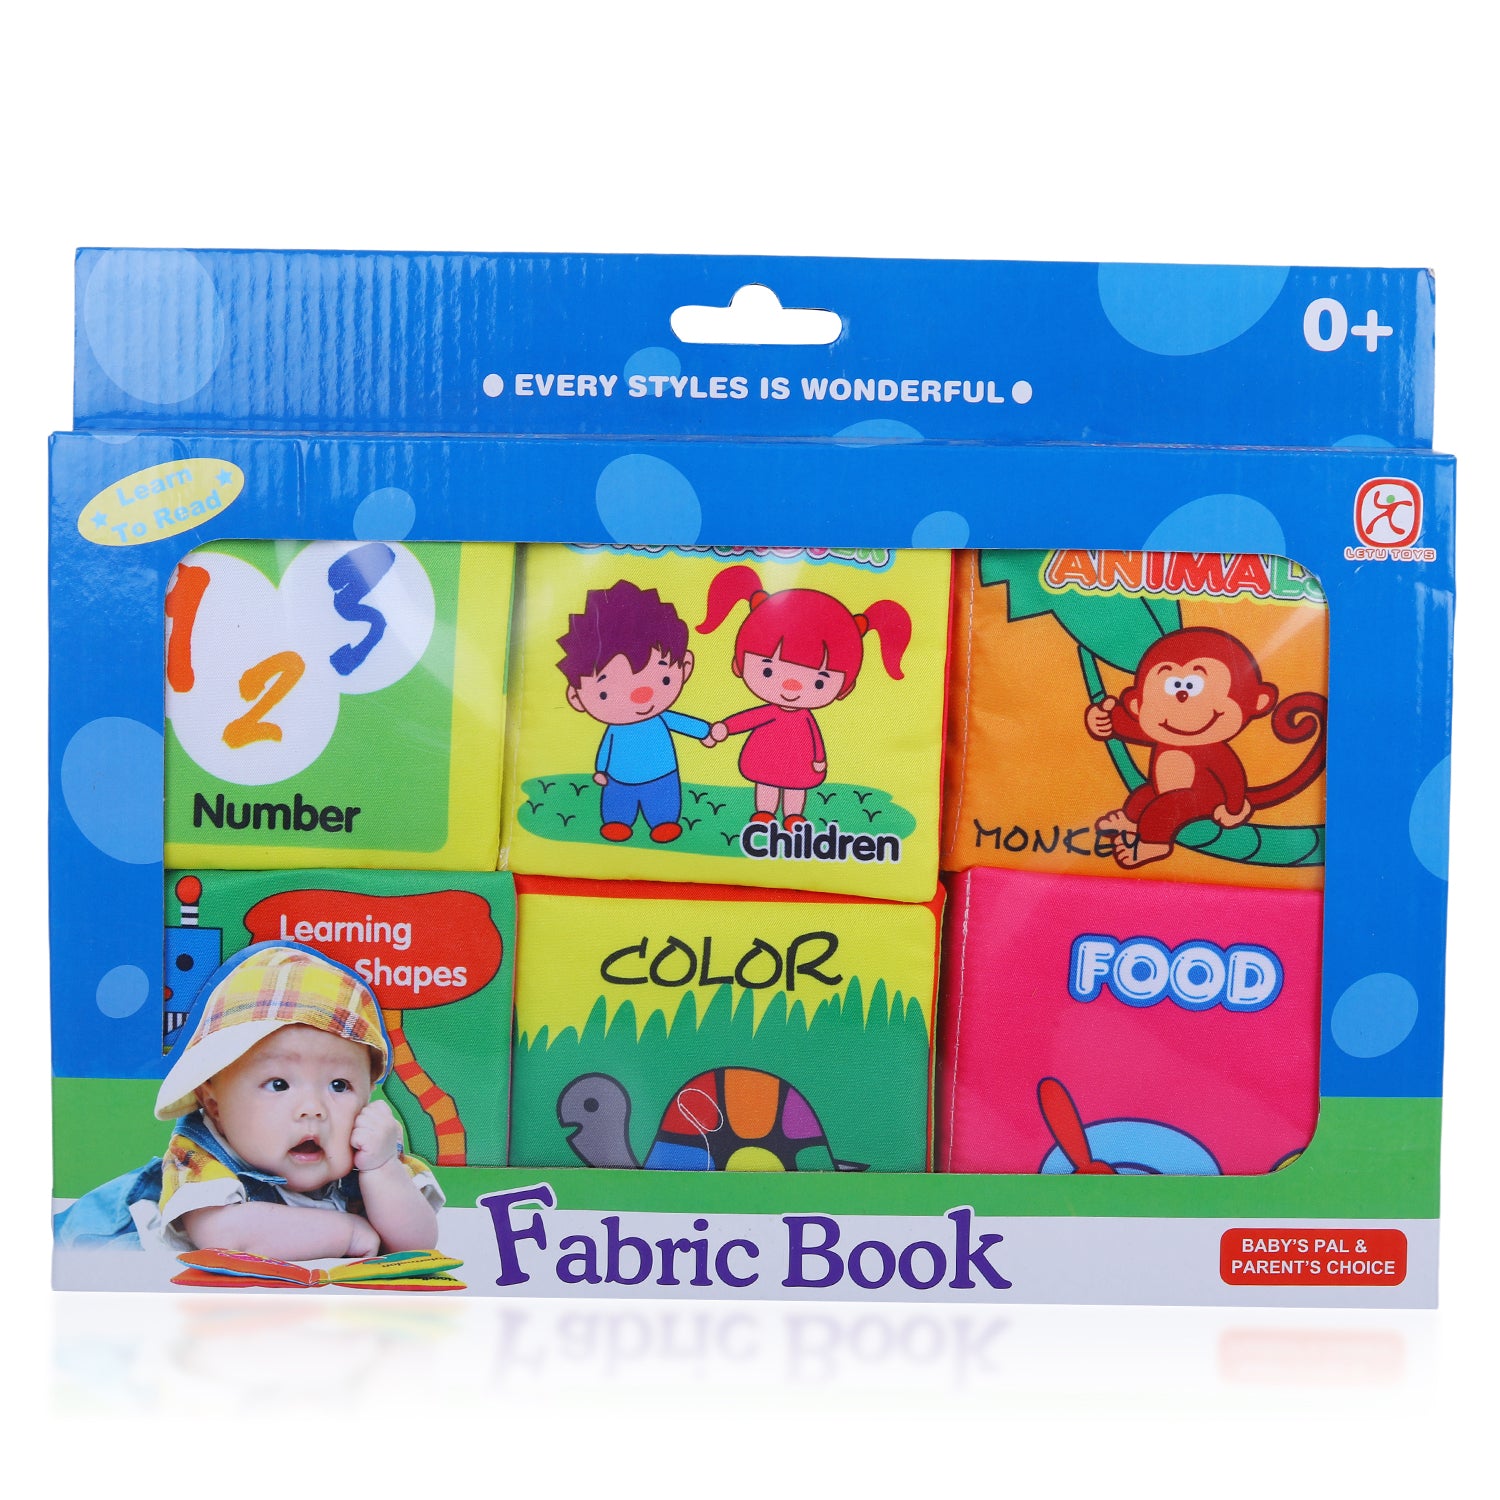 Numbers Animals Shapes Colours Food Characters Educational Cloth Book with Sound Paper Set of 6 - Multicolour - Baby Moo